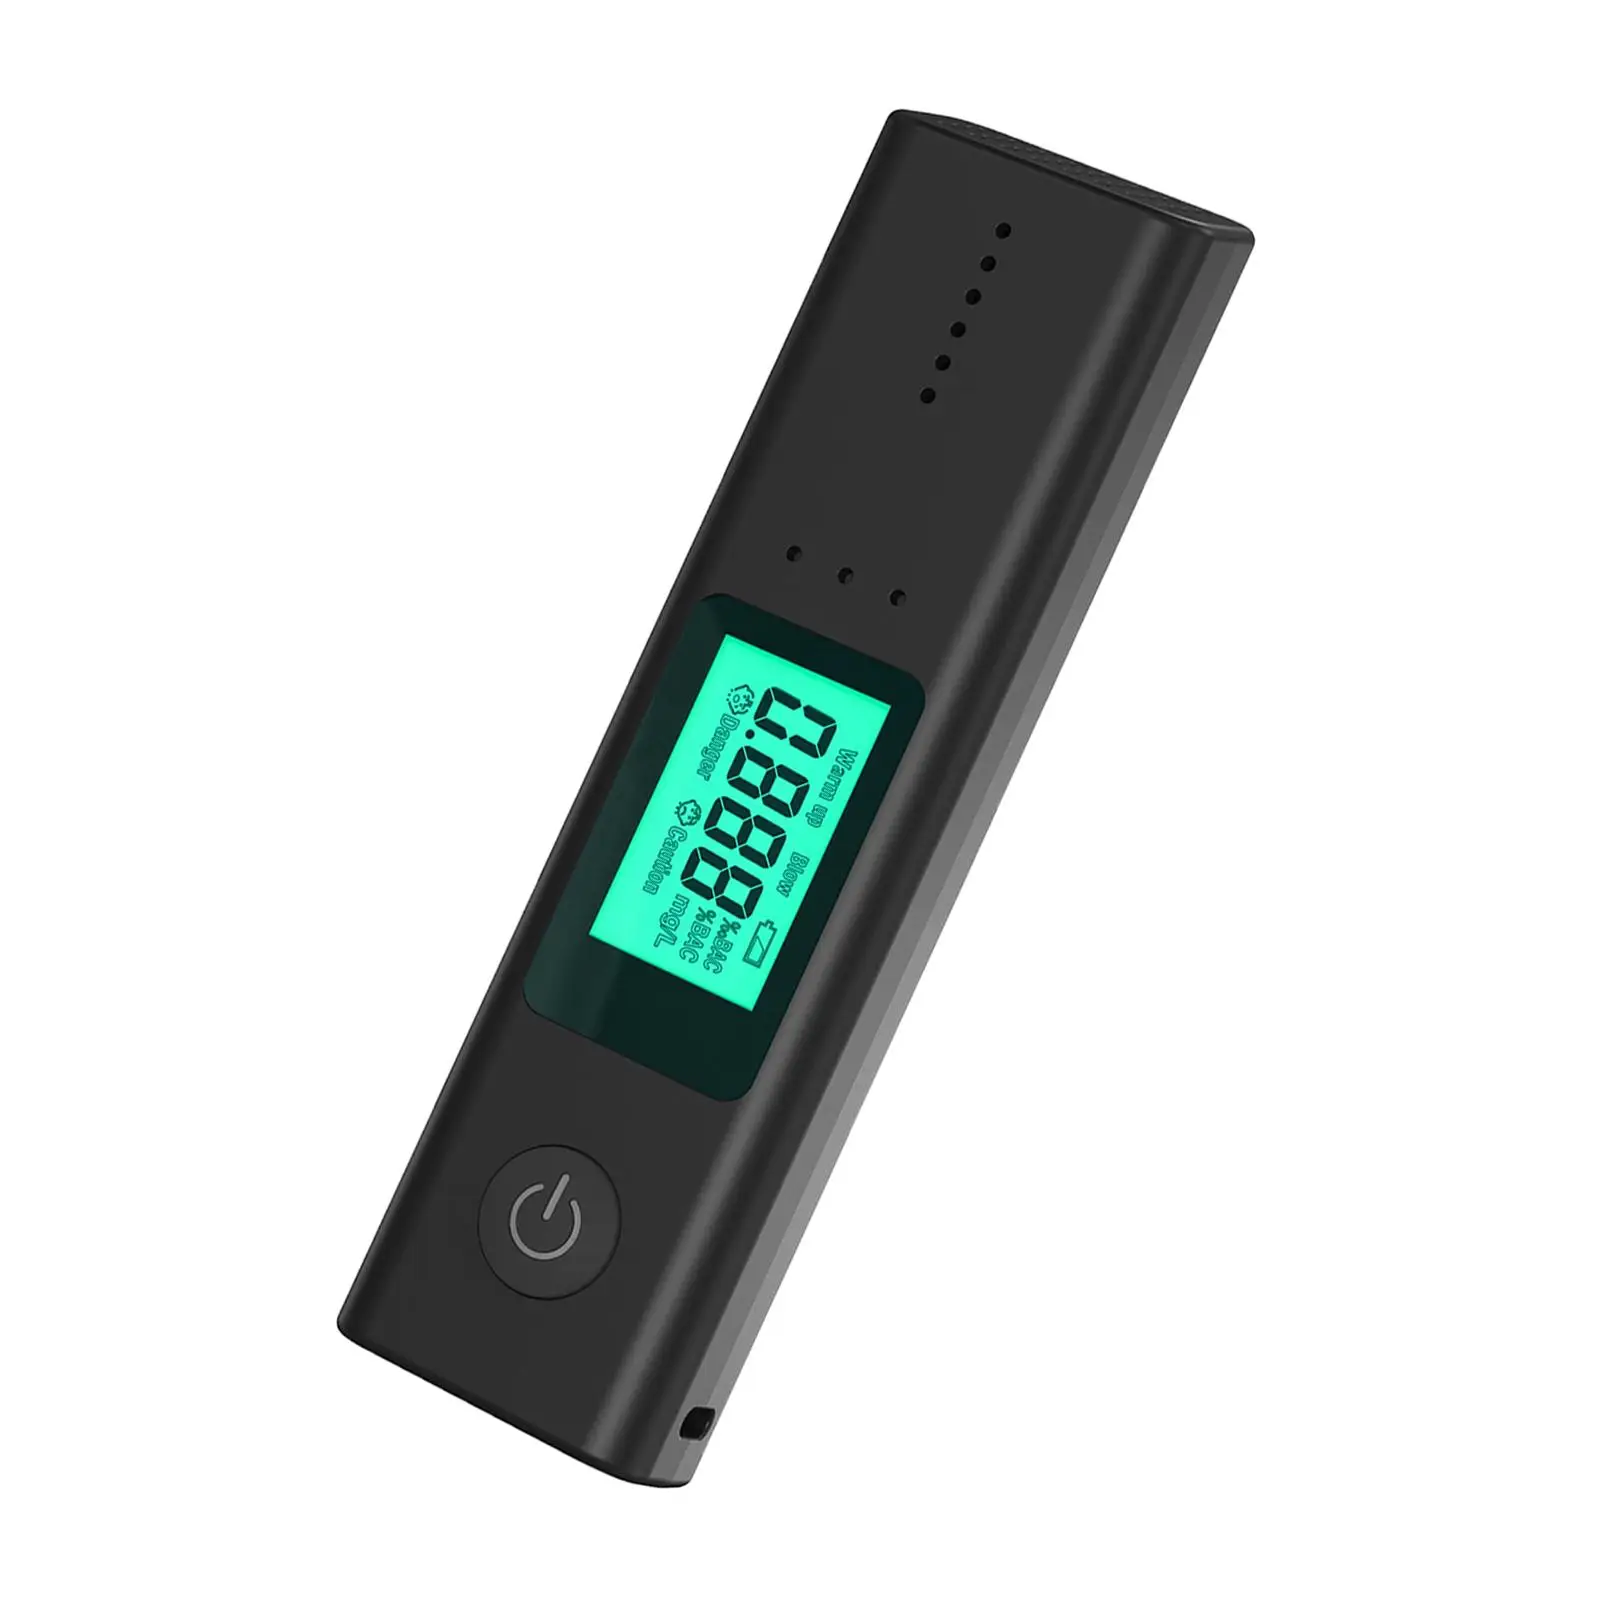 Digital Breath Alcohol Tester Breathalyzers Contactless Portable Detector Meter for Professional Use Personal Alcohol Test Tools